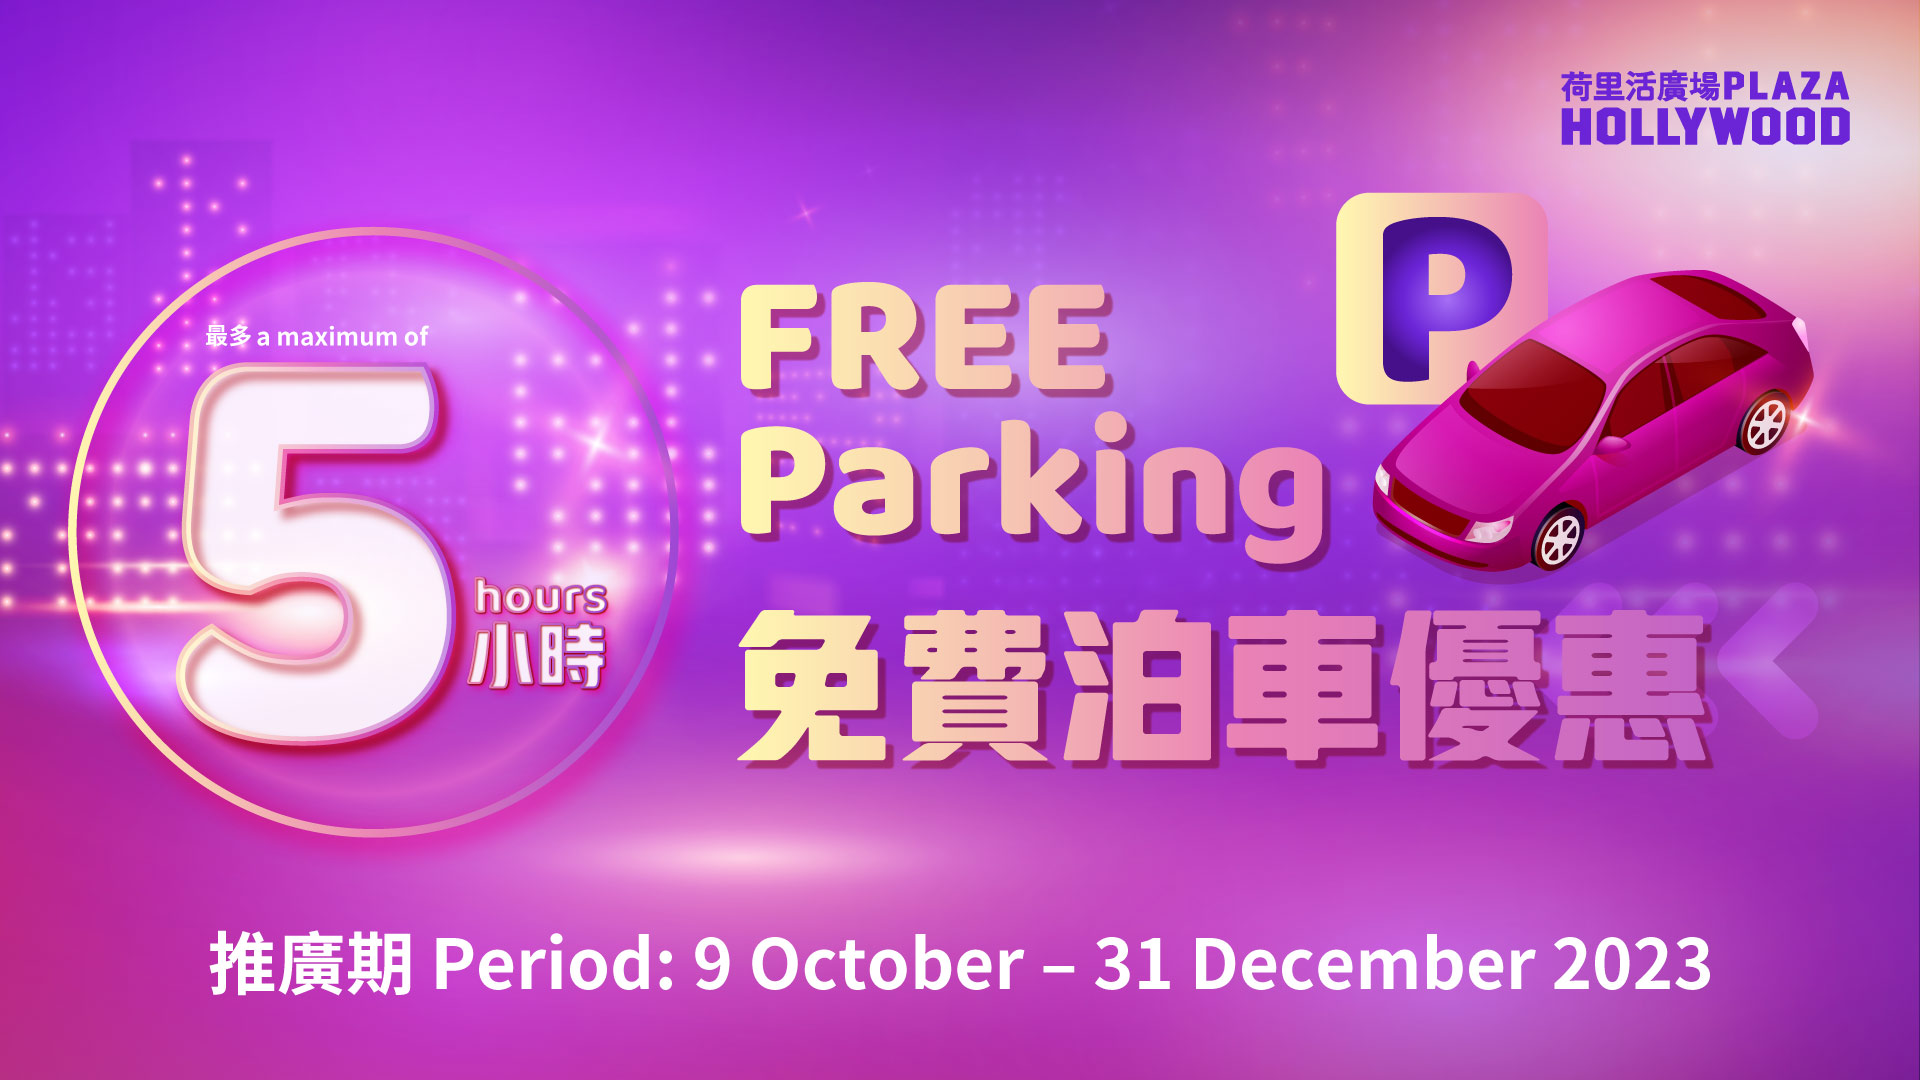 Parking offers Complimentary FREE Parking